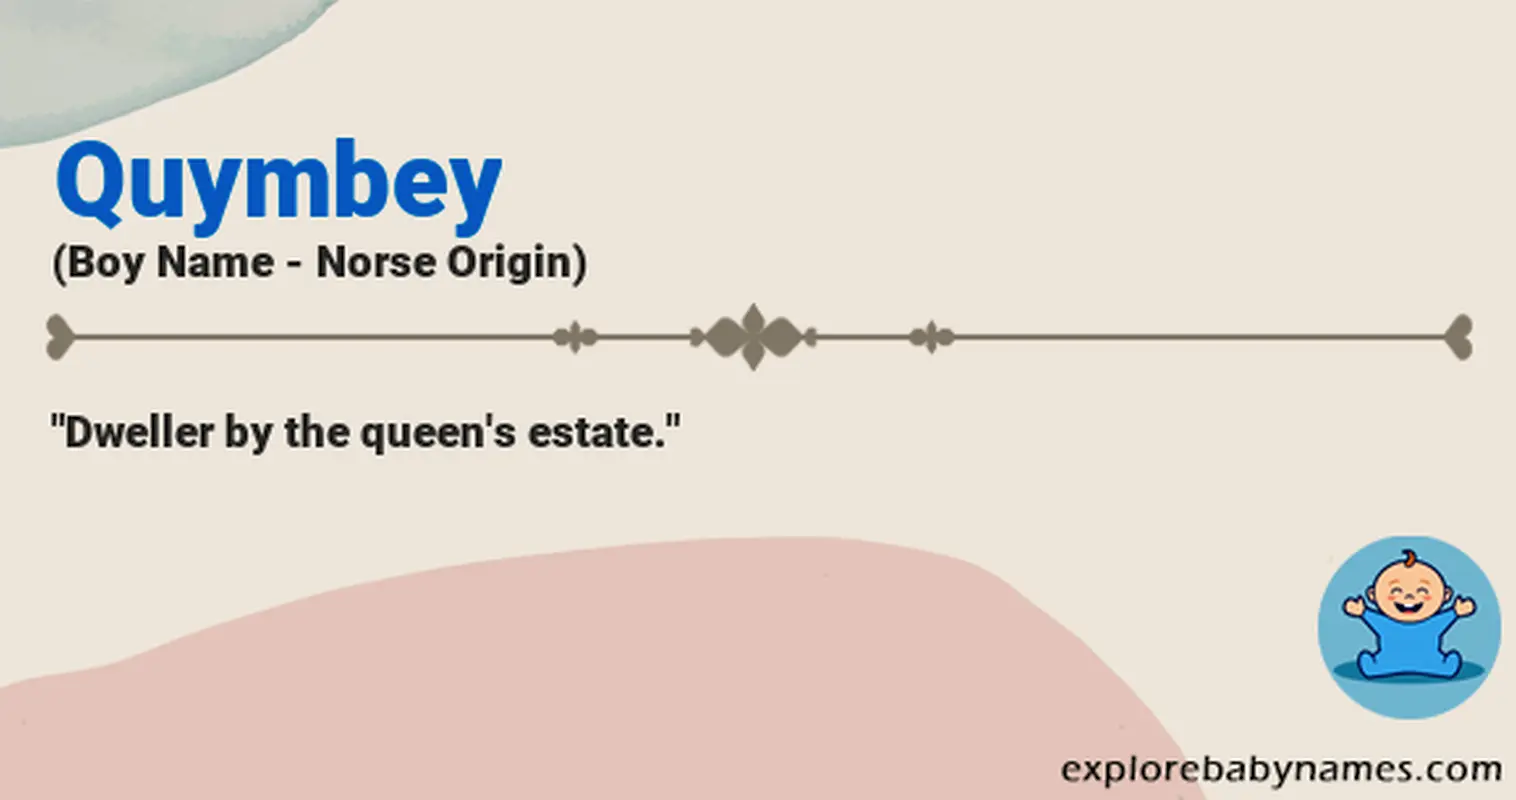 Meaning of Quymbey